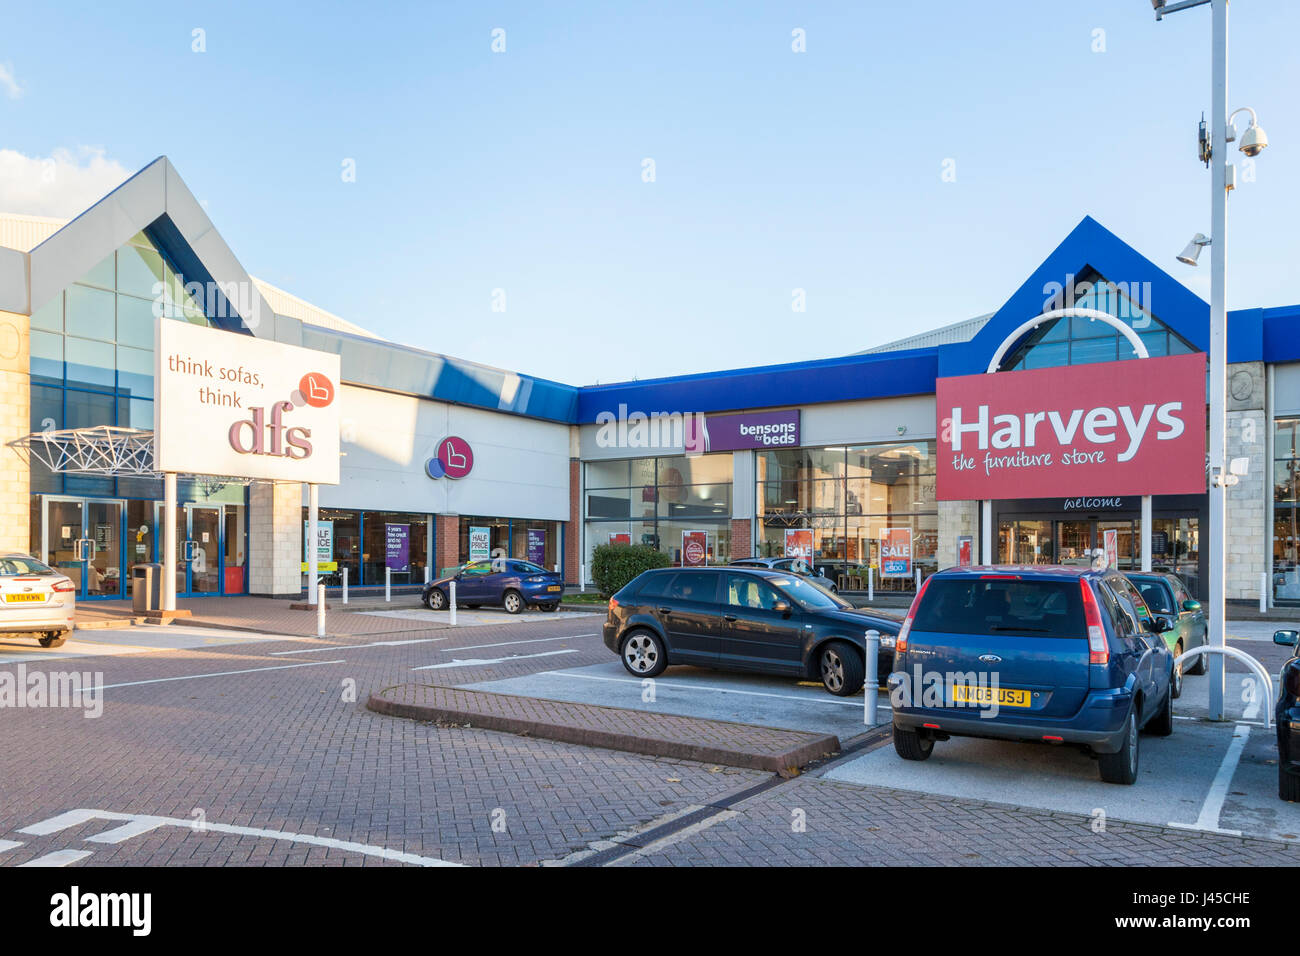 Furniture Stores Dfs And Harveys Store Next Door To Each Other At